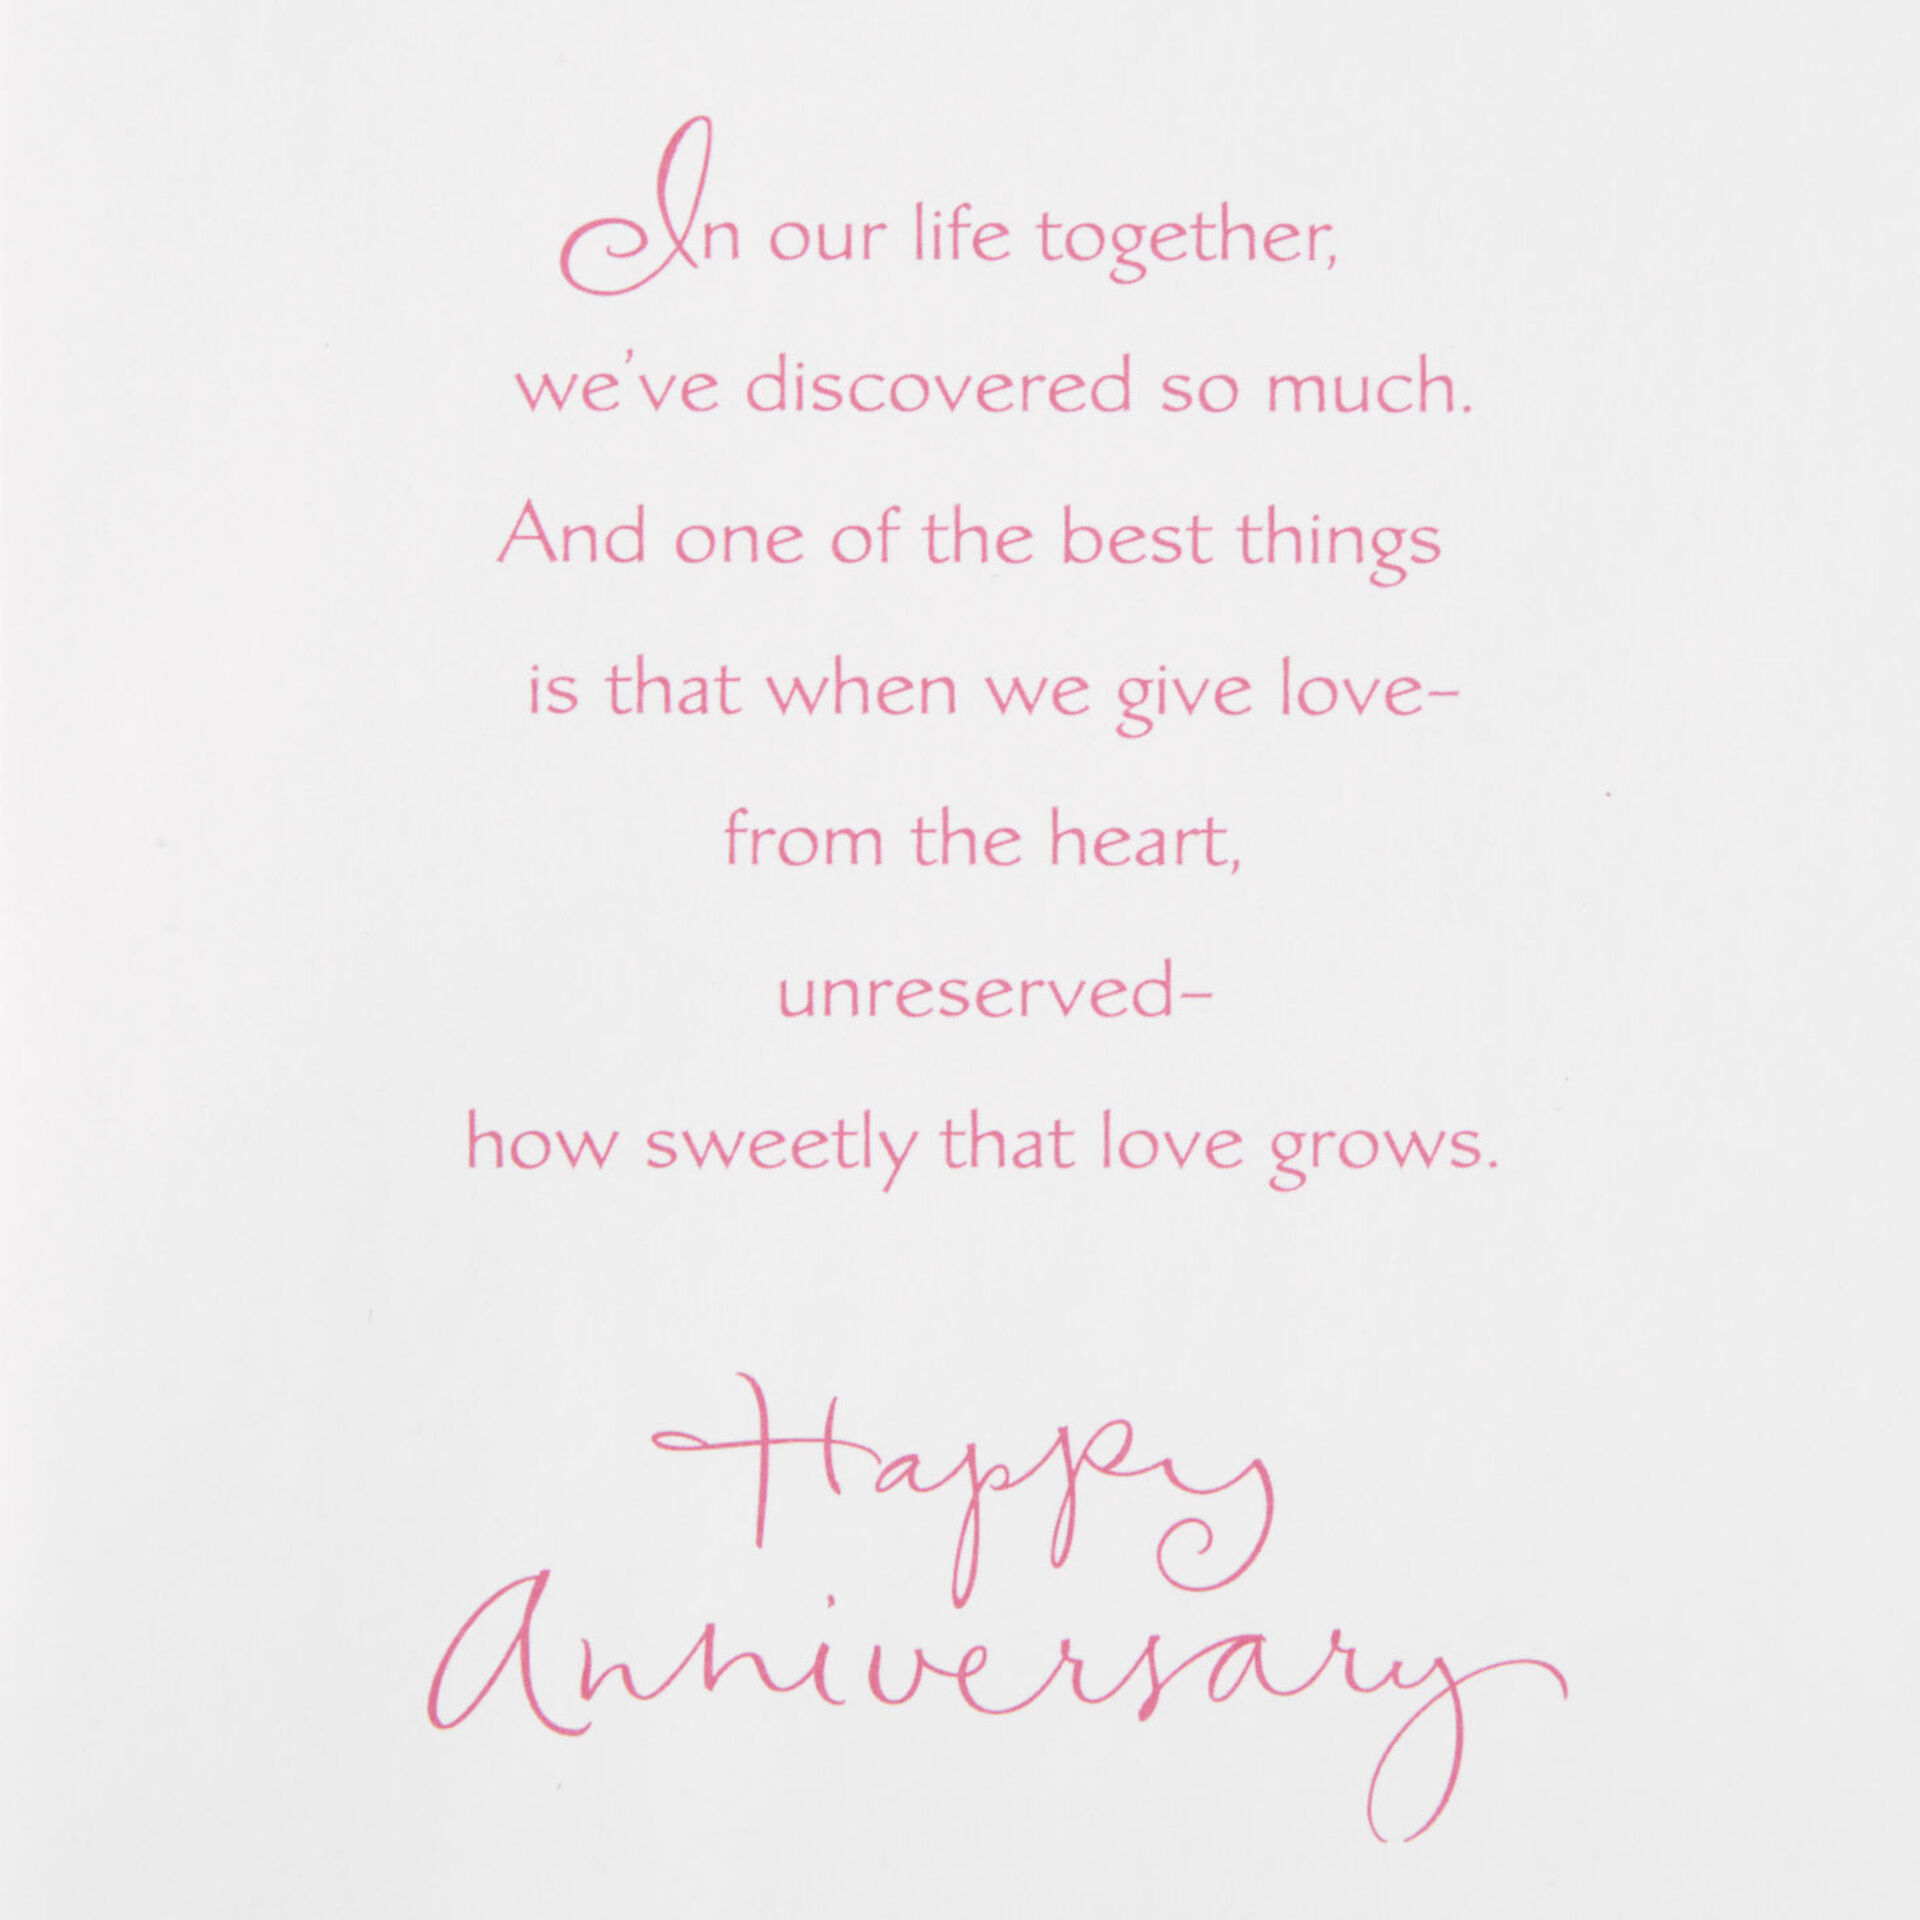 How Sweetly Love Grows Anniversary Card for Wife - Greeting Cards ...